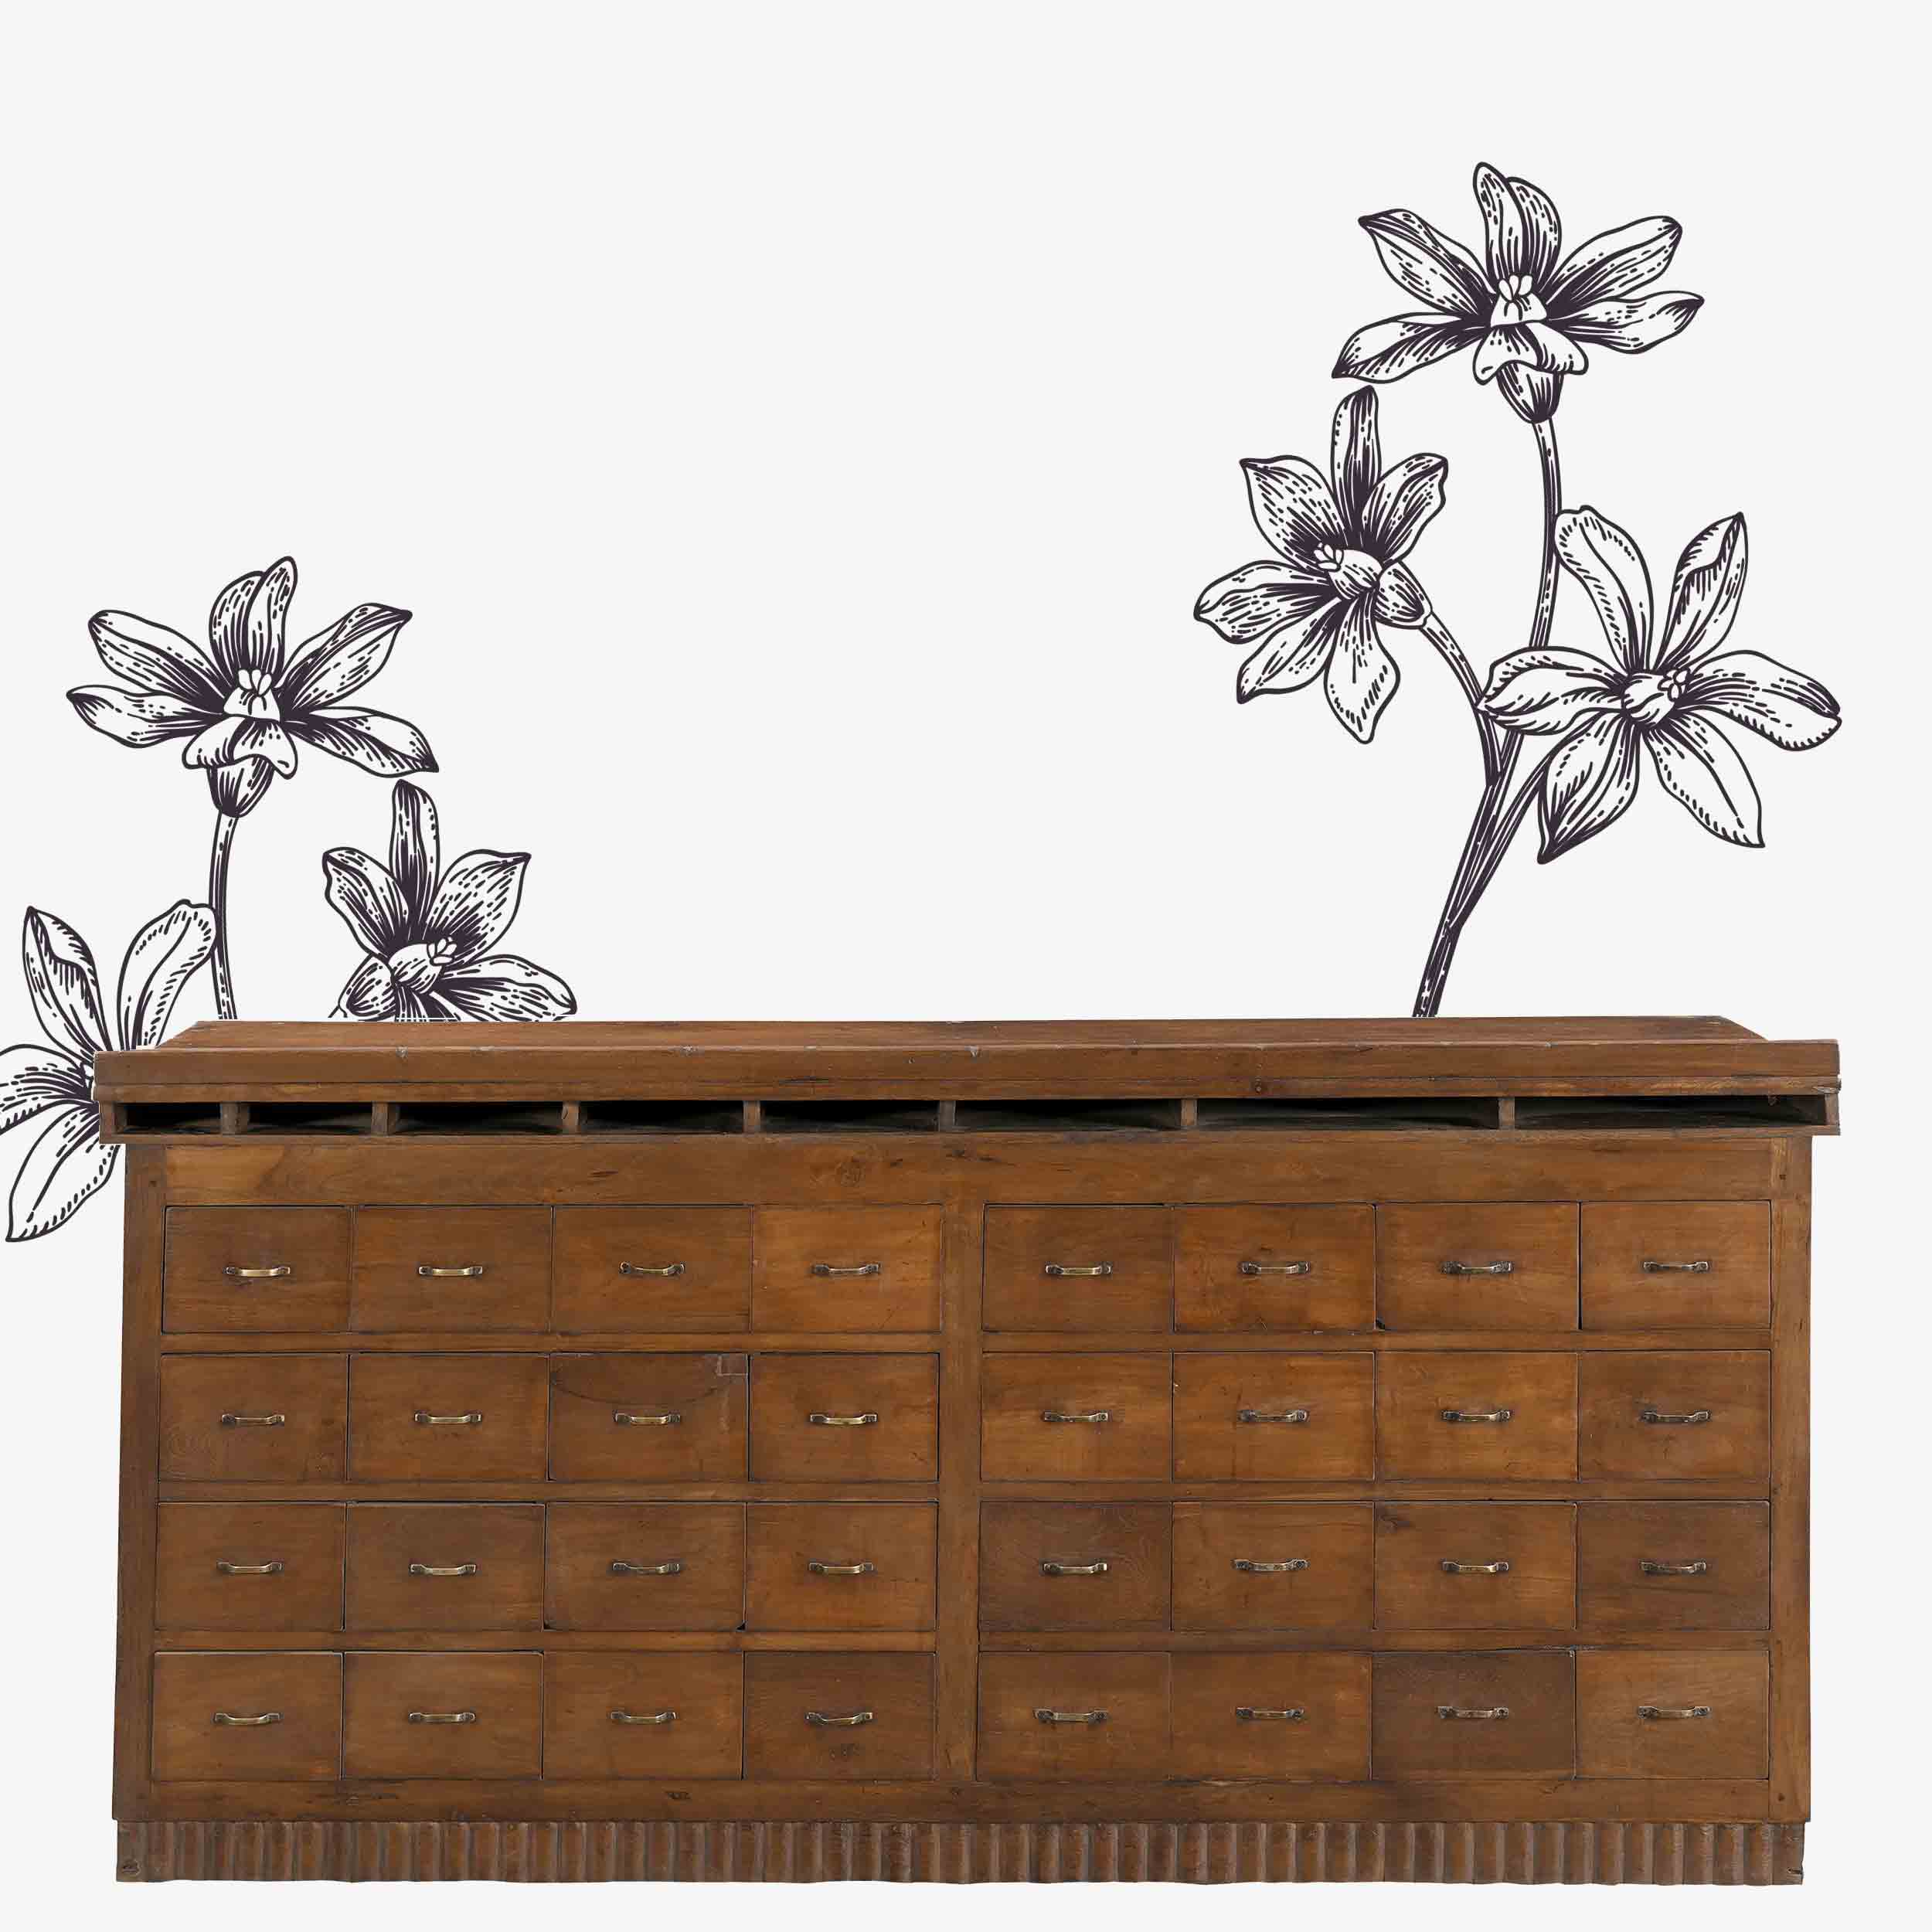 The Flynn Antique Island with Drawers